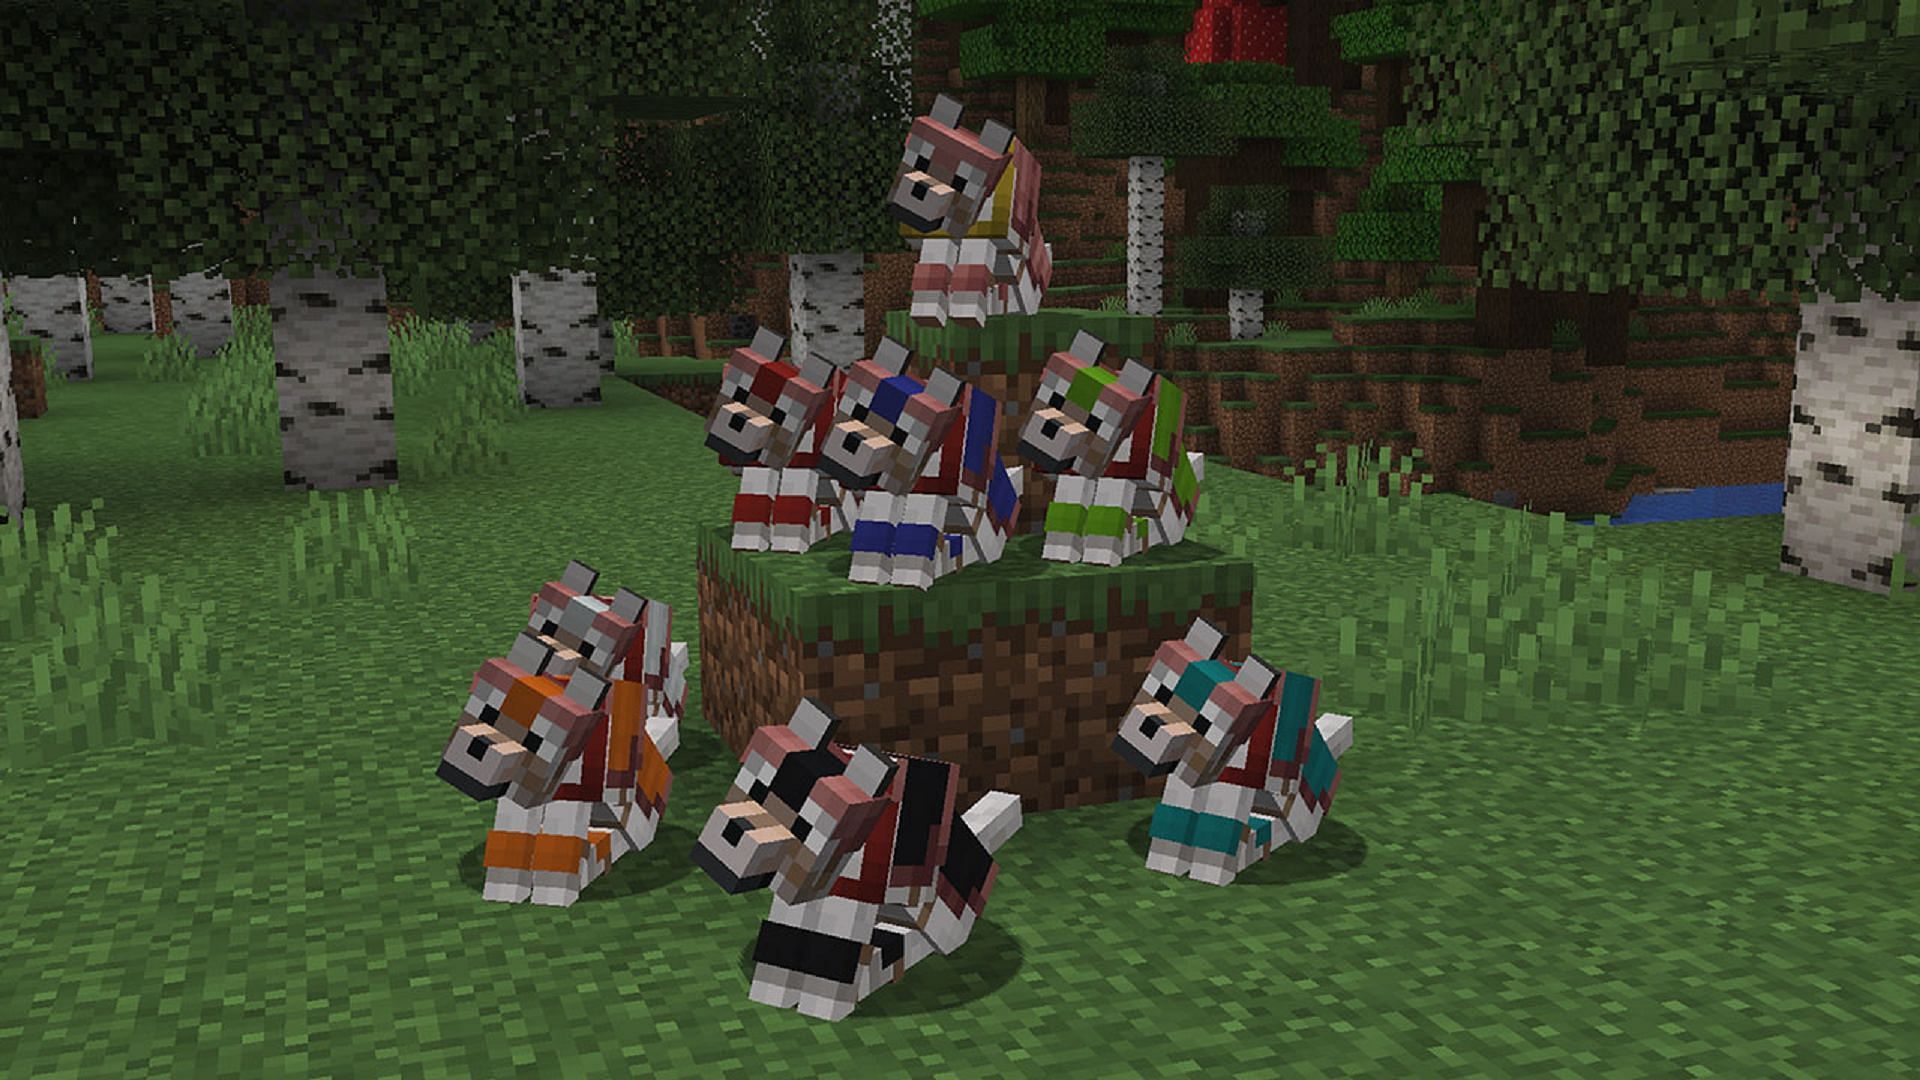 Wolf armor has become even more expressive in this Minecraft Preview (Image via Mojang)